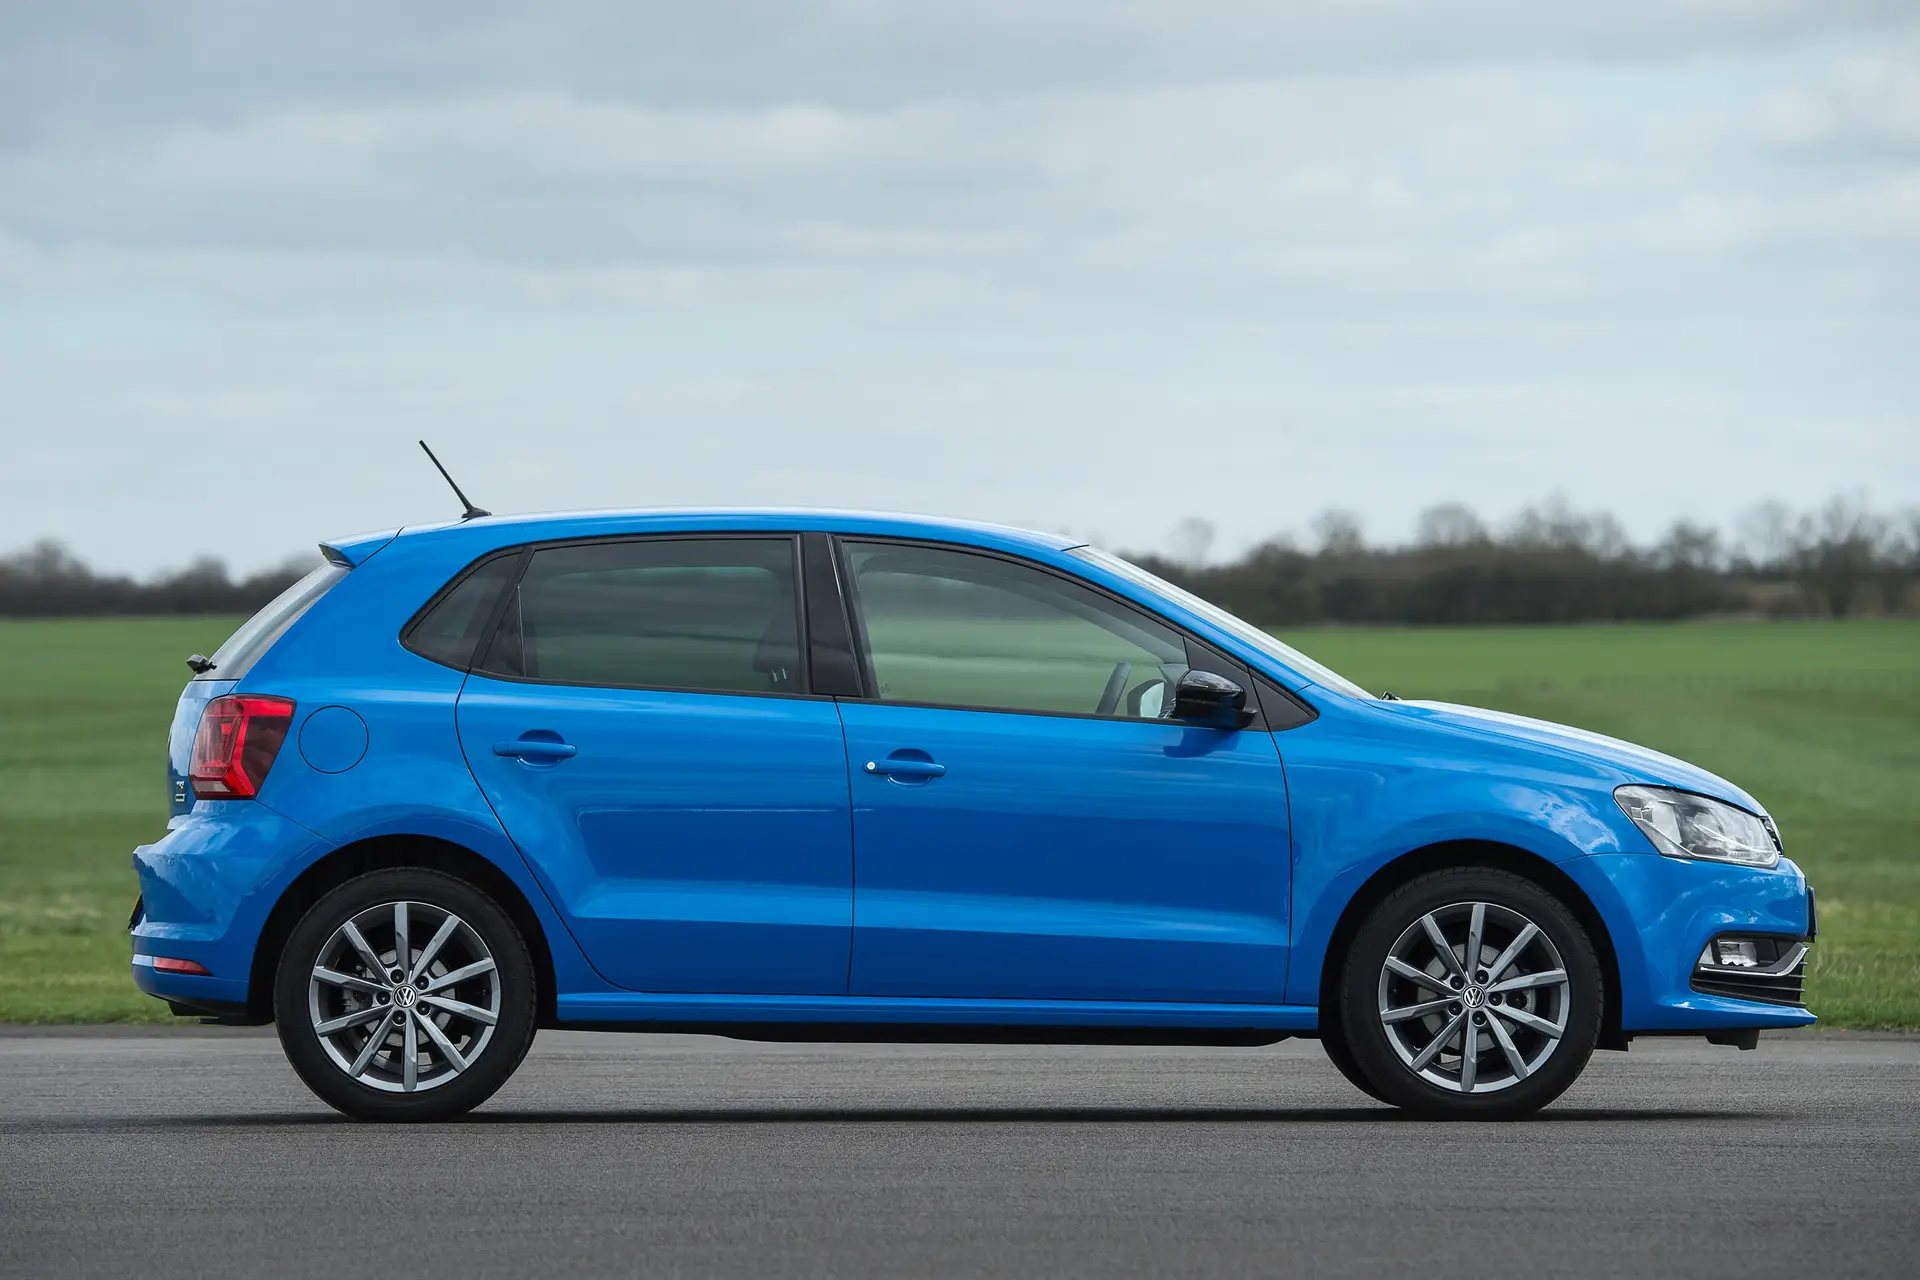  Volkswagen Polo (2009-2017) Review: exterior side photo of the Volkswagen Polo 